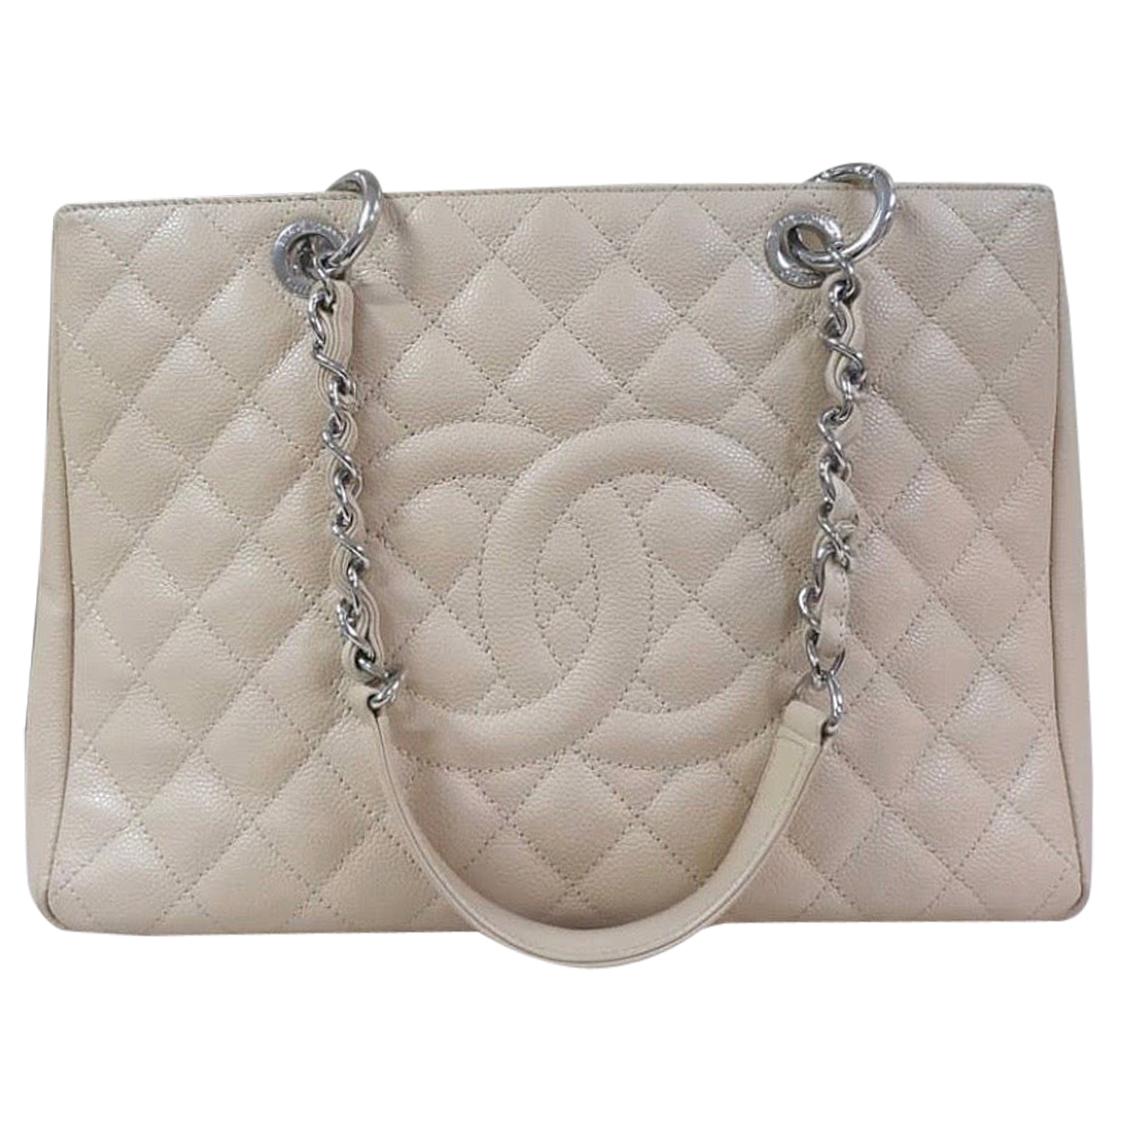 Chanel Caviar Cream Leather Grand Shopping Tote Bag For Sale at